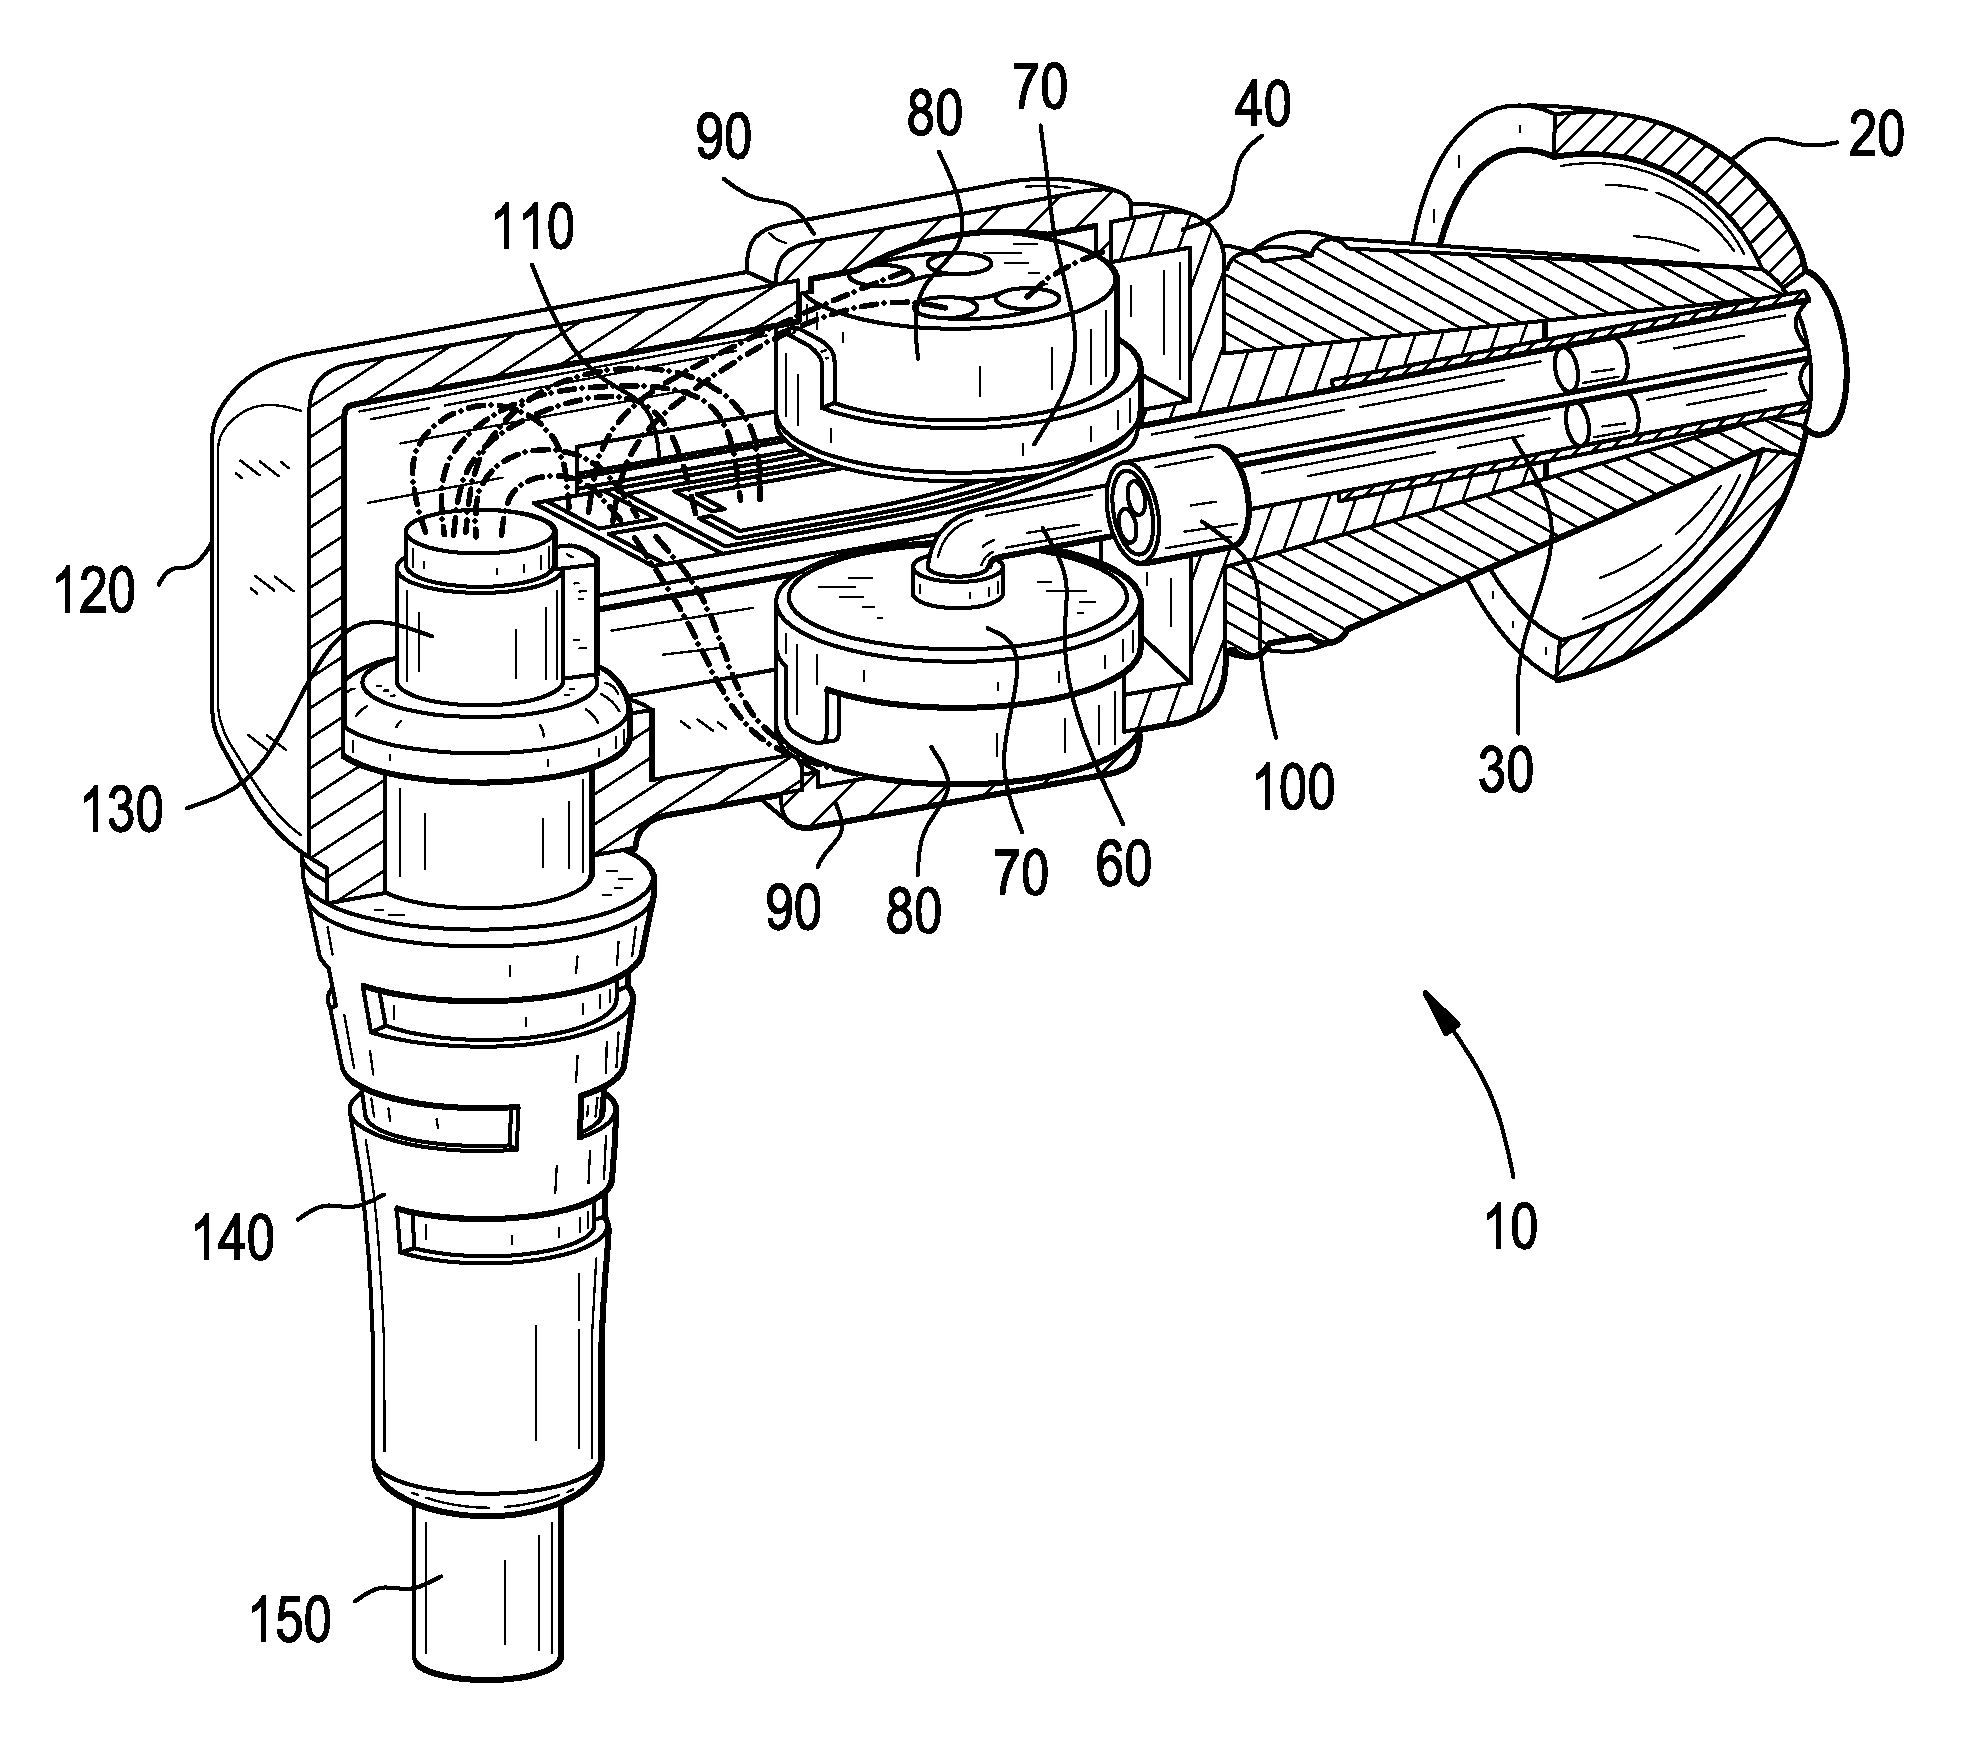 Hearing testing probe apparatus with digital interface